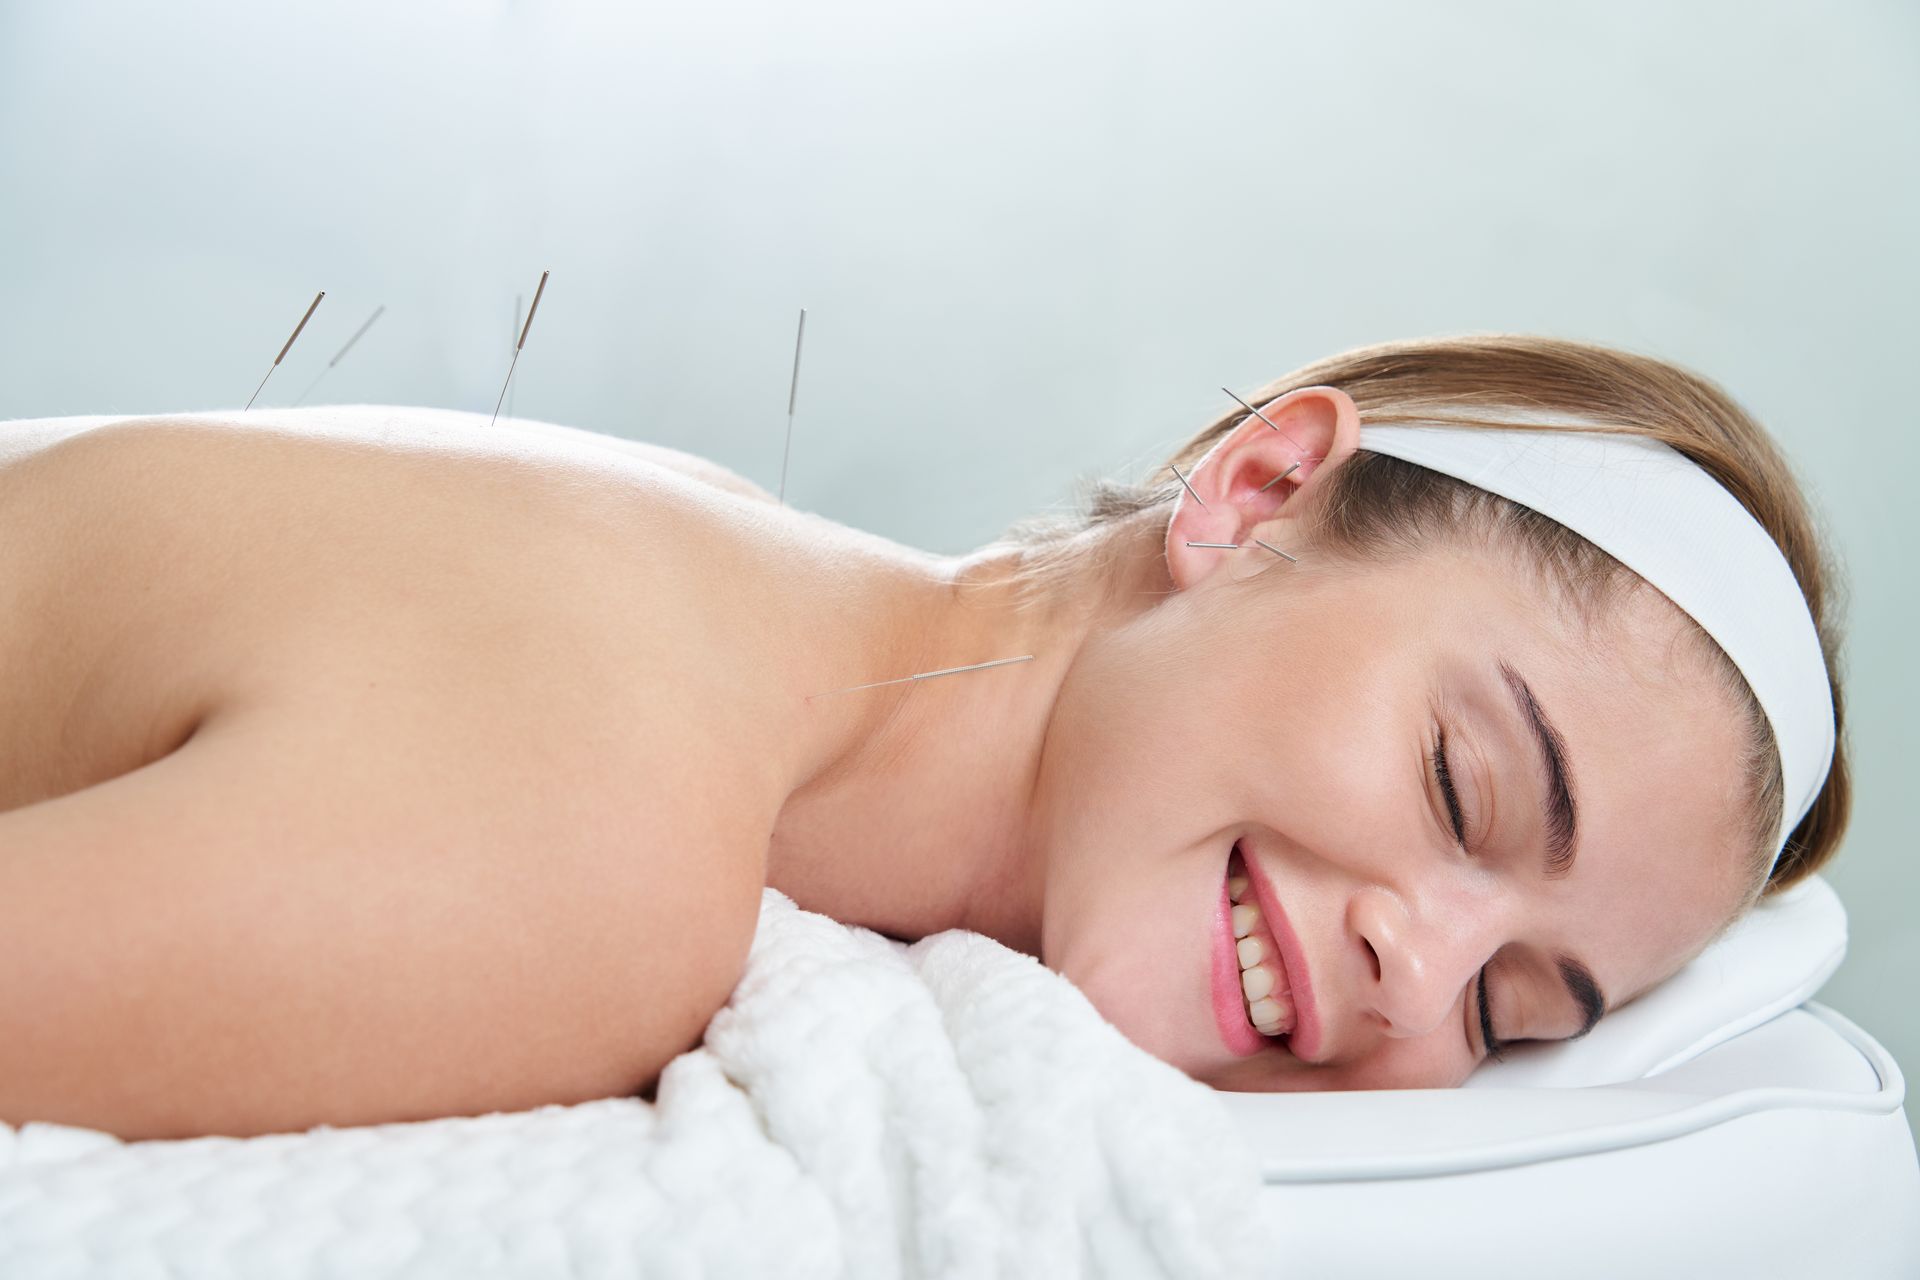 a woman is smiling while getting acupuncture on her back